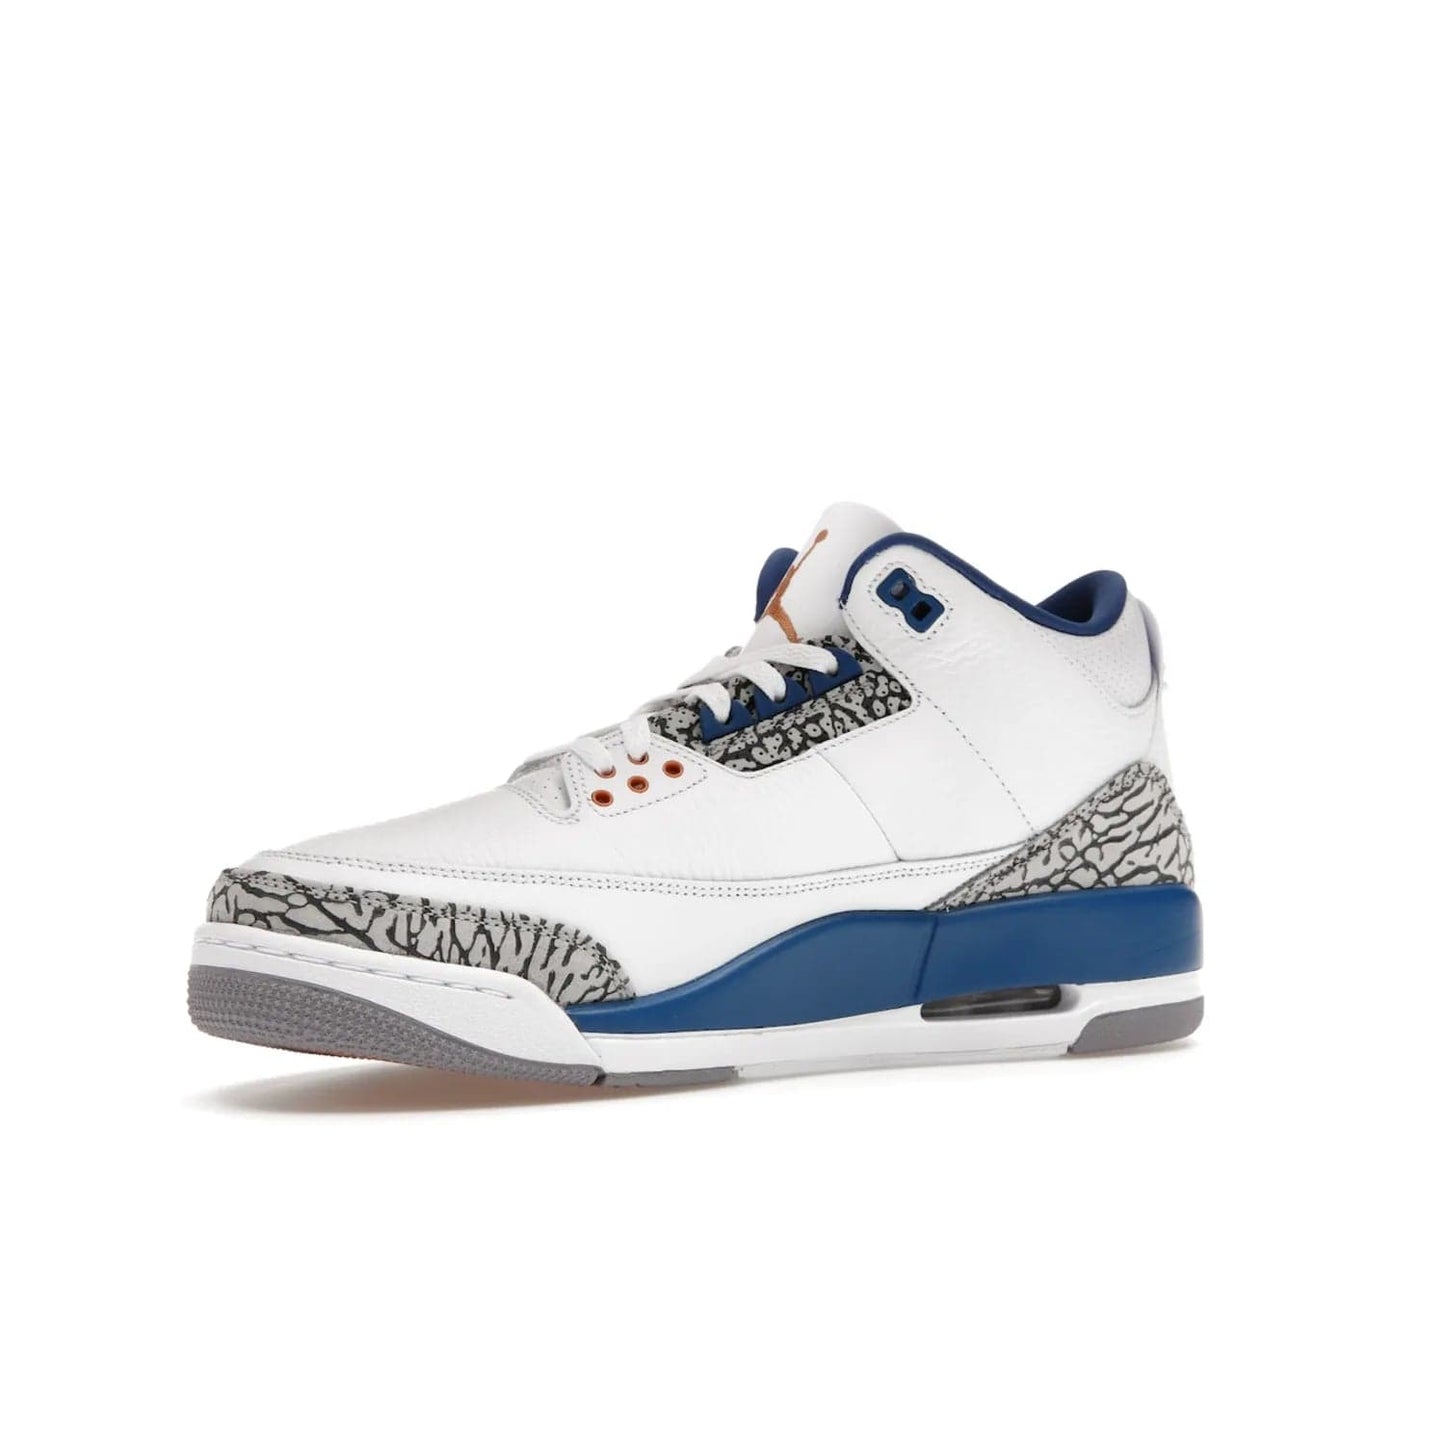 Jordan 3 Retro Wizards - Image 16 - Only at www.BallersClubKickz.com - ##
Special tribute sneaker from Jordan Brand to Michael Jordan's time with the Washington Wizards. Iconic white upper, orange Jumpman logo, blue accents, metallic copper details, and cement grey outsole. Buy the Air Jordan 3 Retro Wizards April 29, 2023.